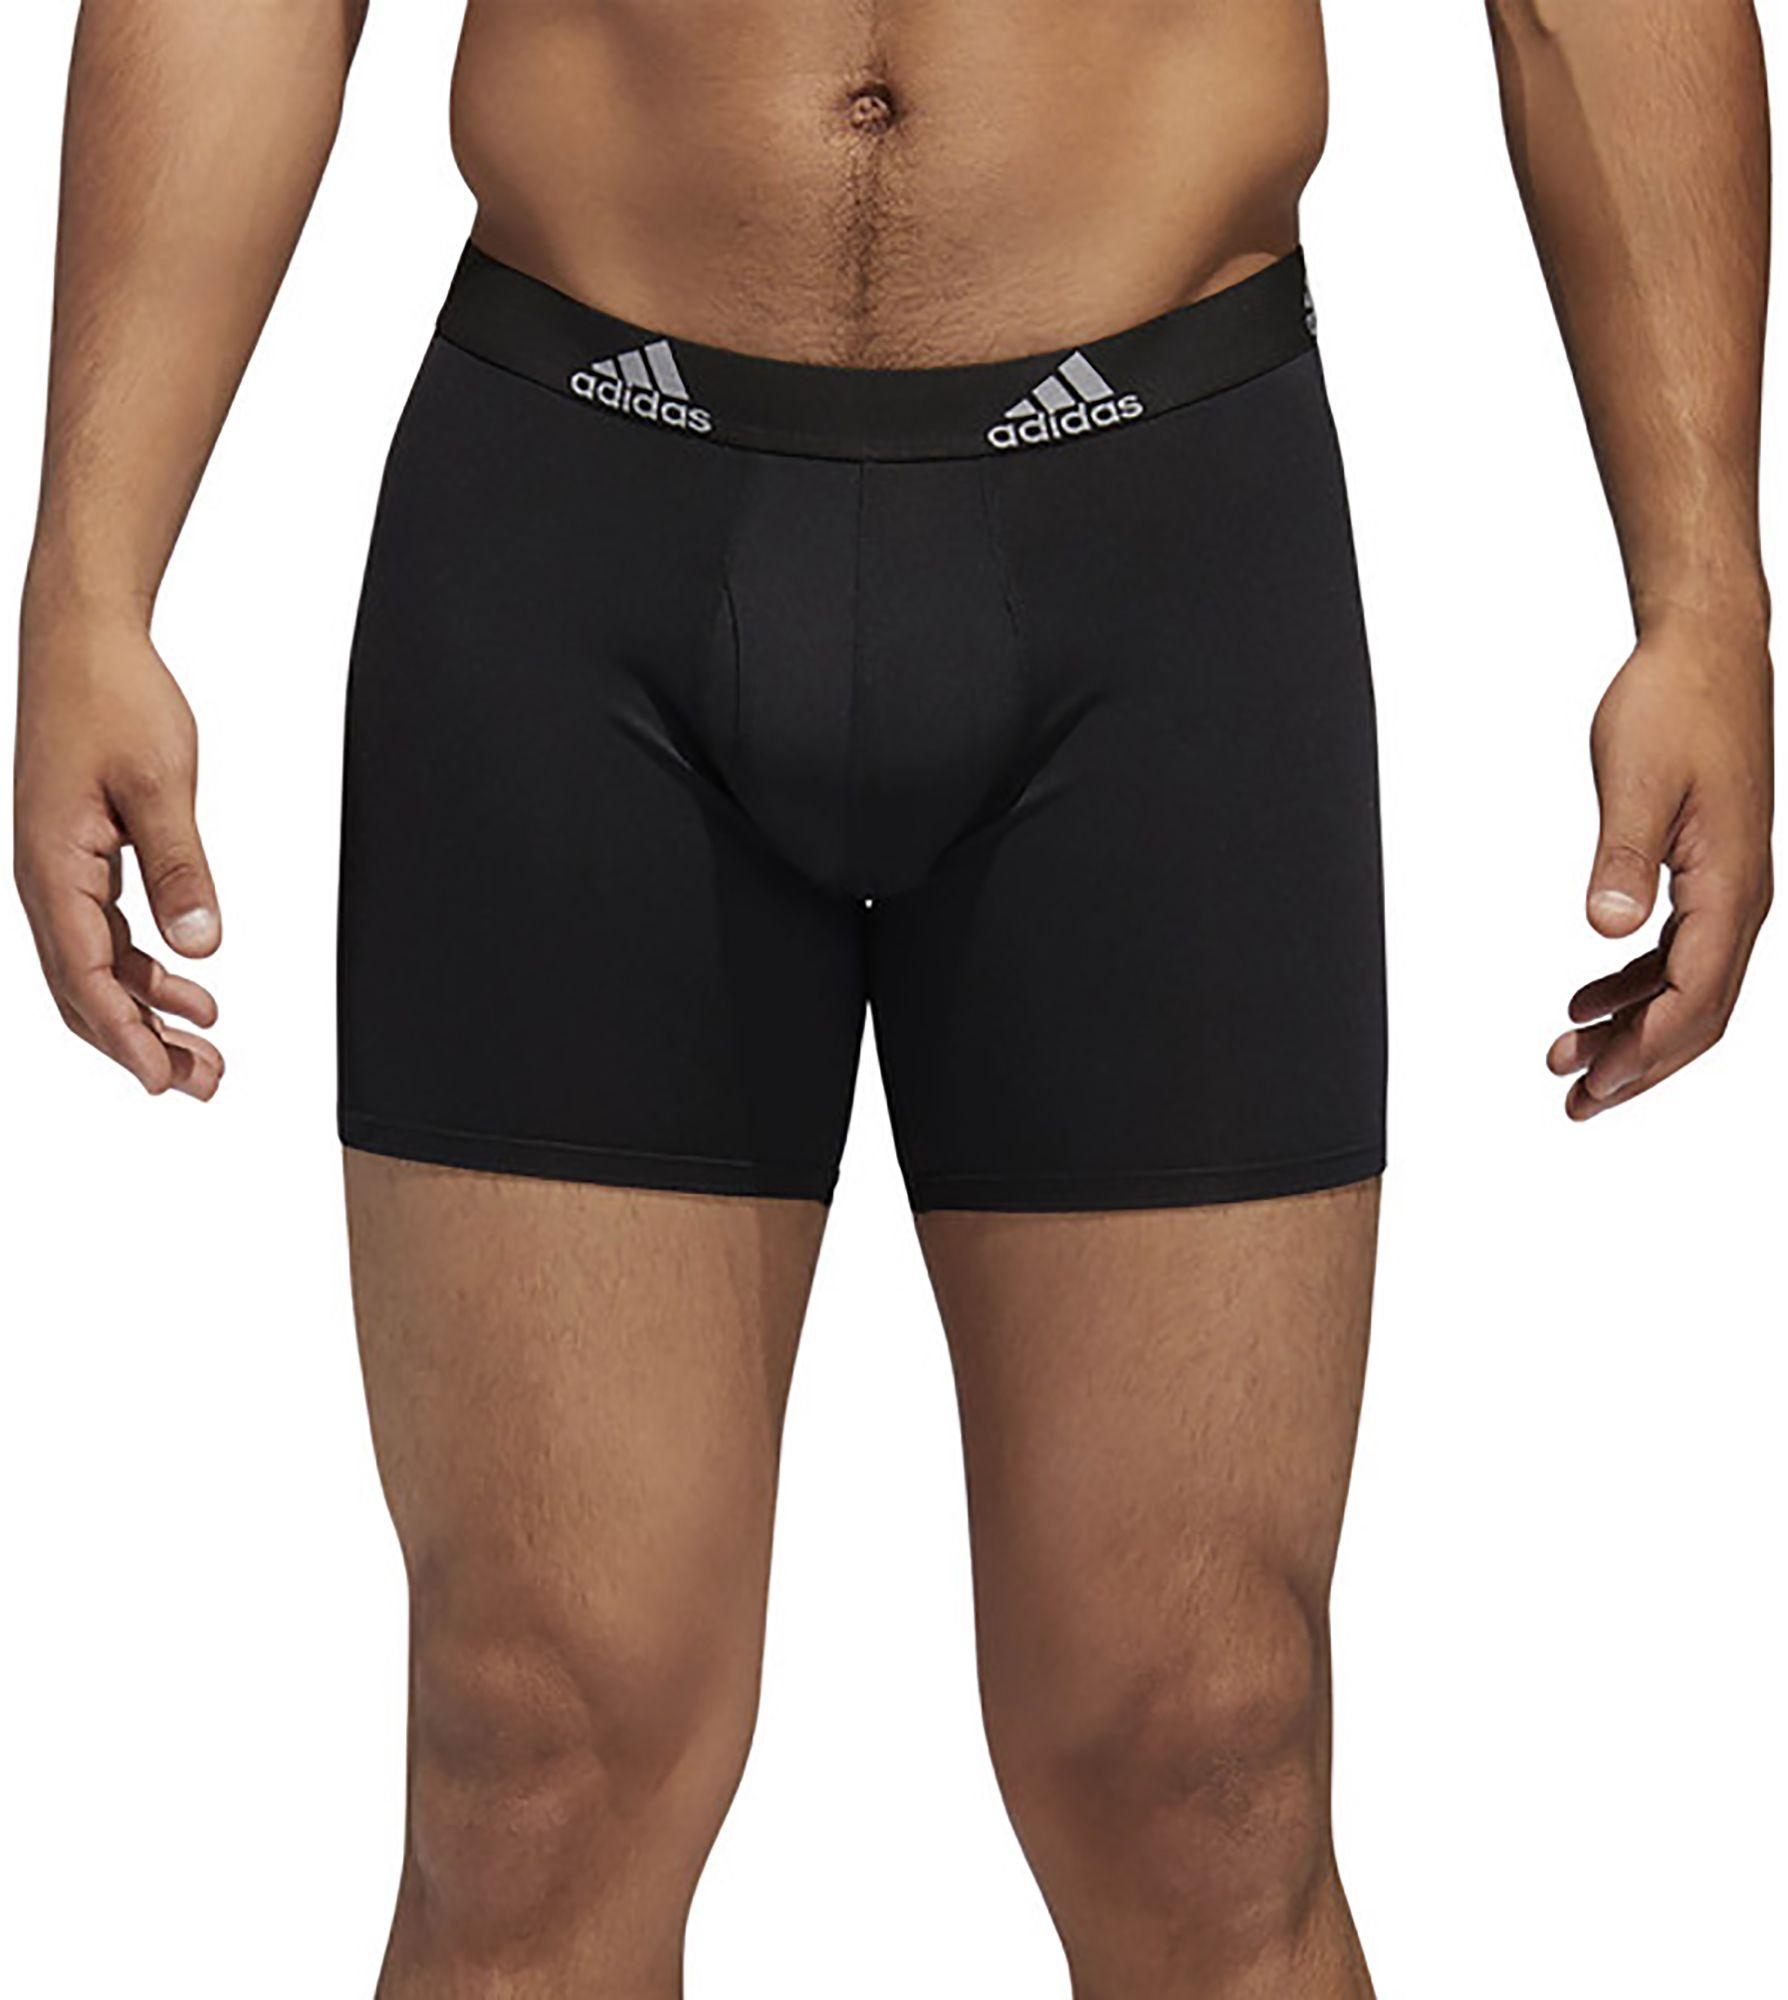 adidas Performance Boxer Briefs – 3 Pack in Black for Men - Lyst